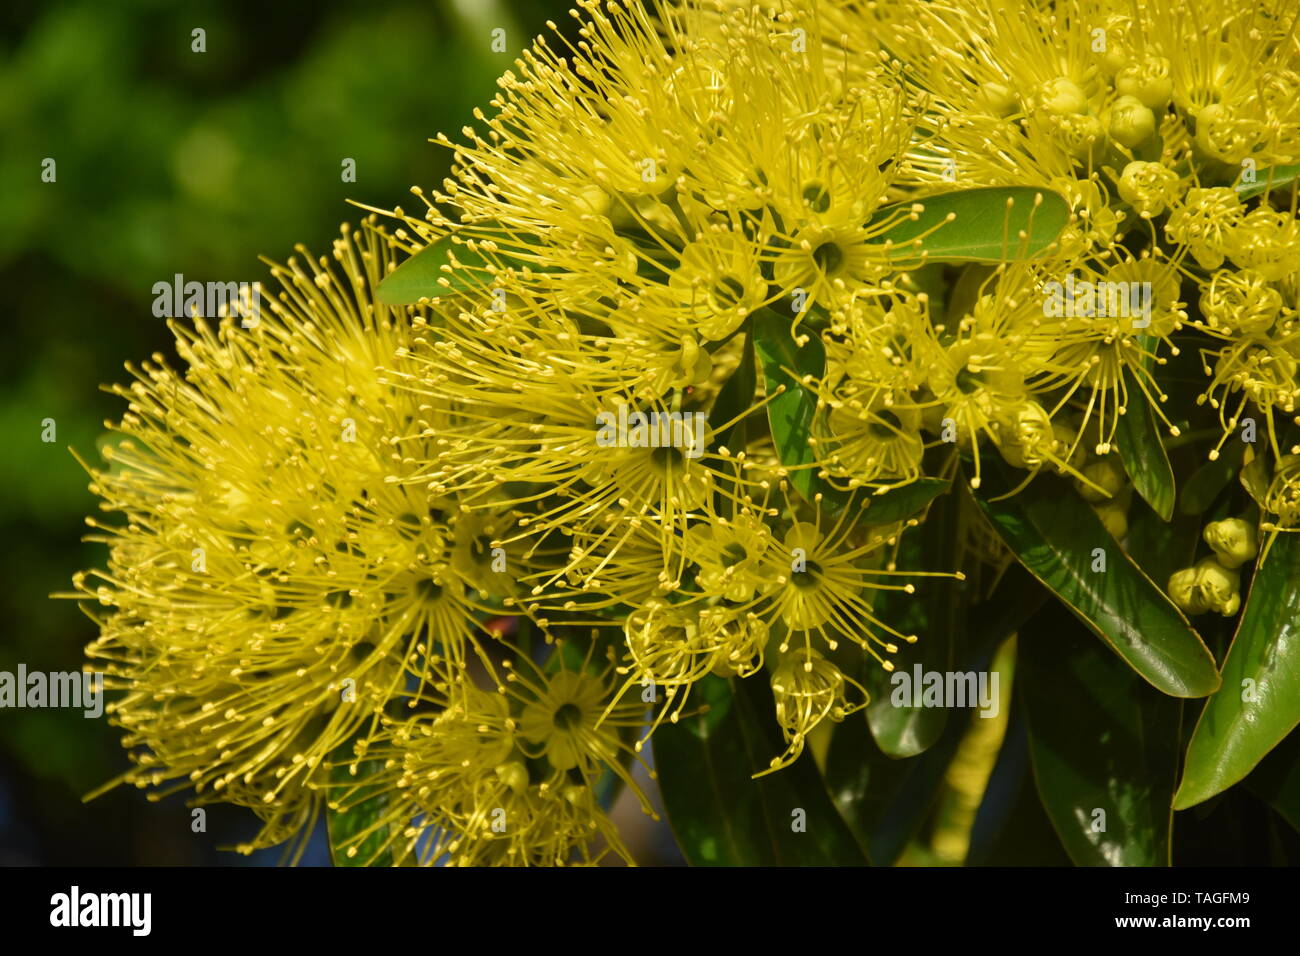 Beautiful fluffy eucalyptus flowers on a close-up branch. Yellow flowers of the gumtree Angophora hispida. Stock Photo